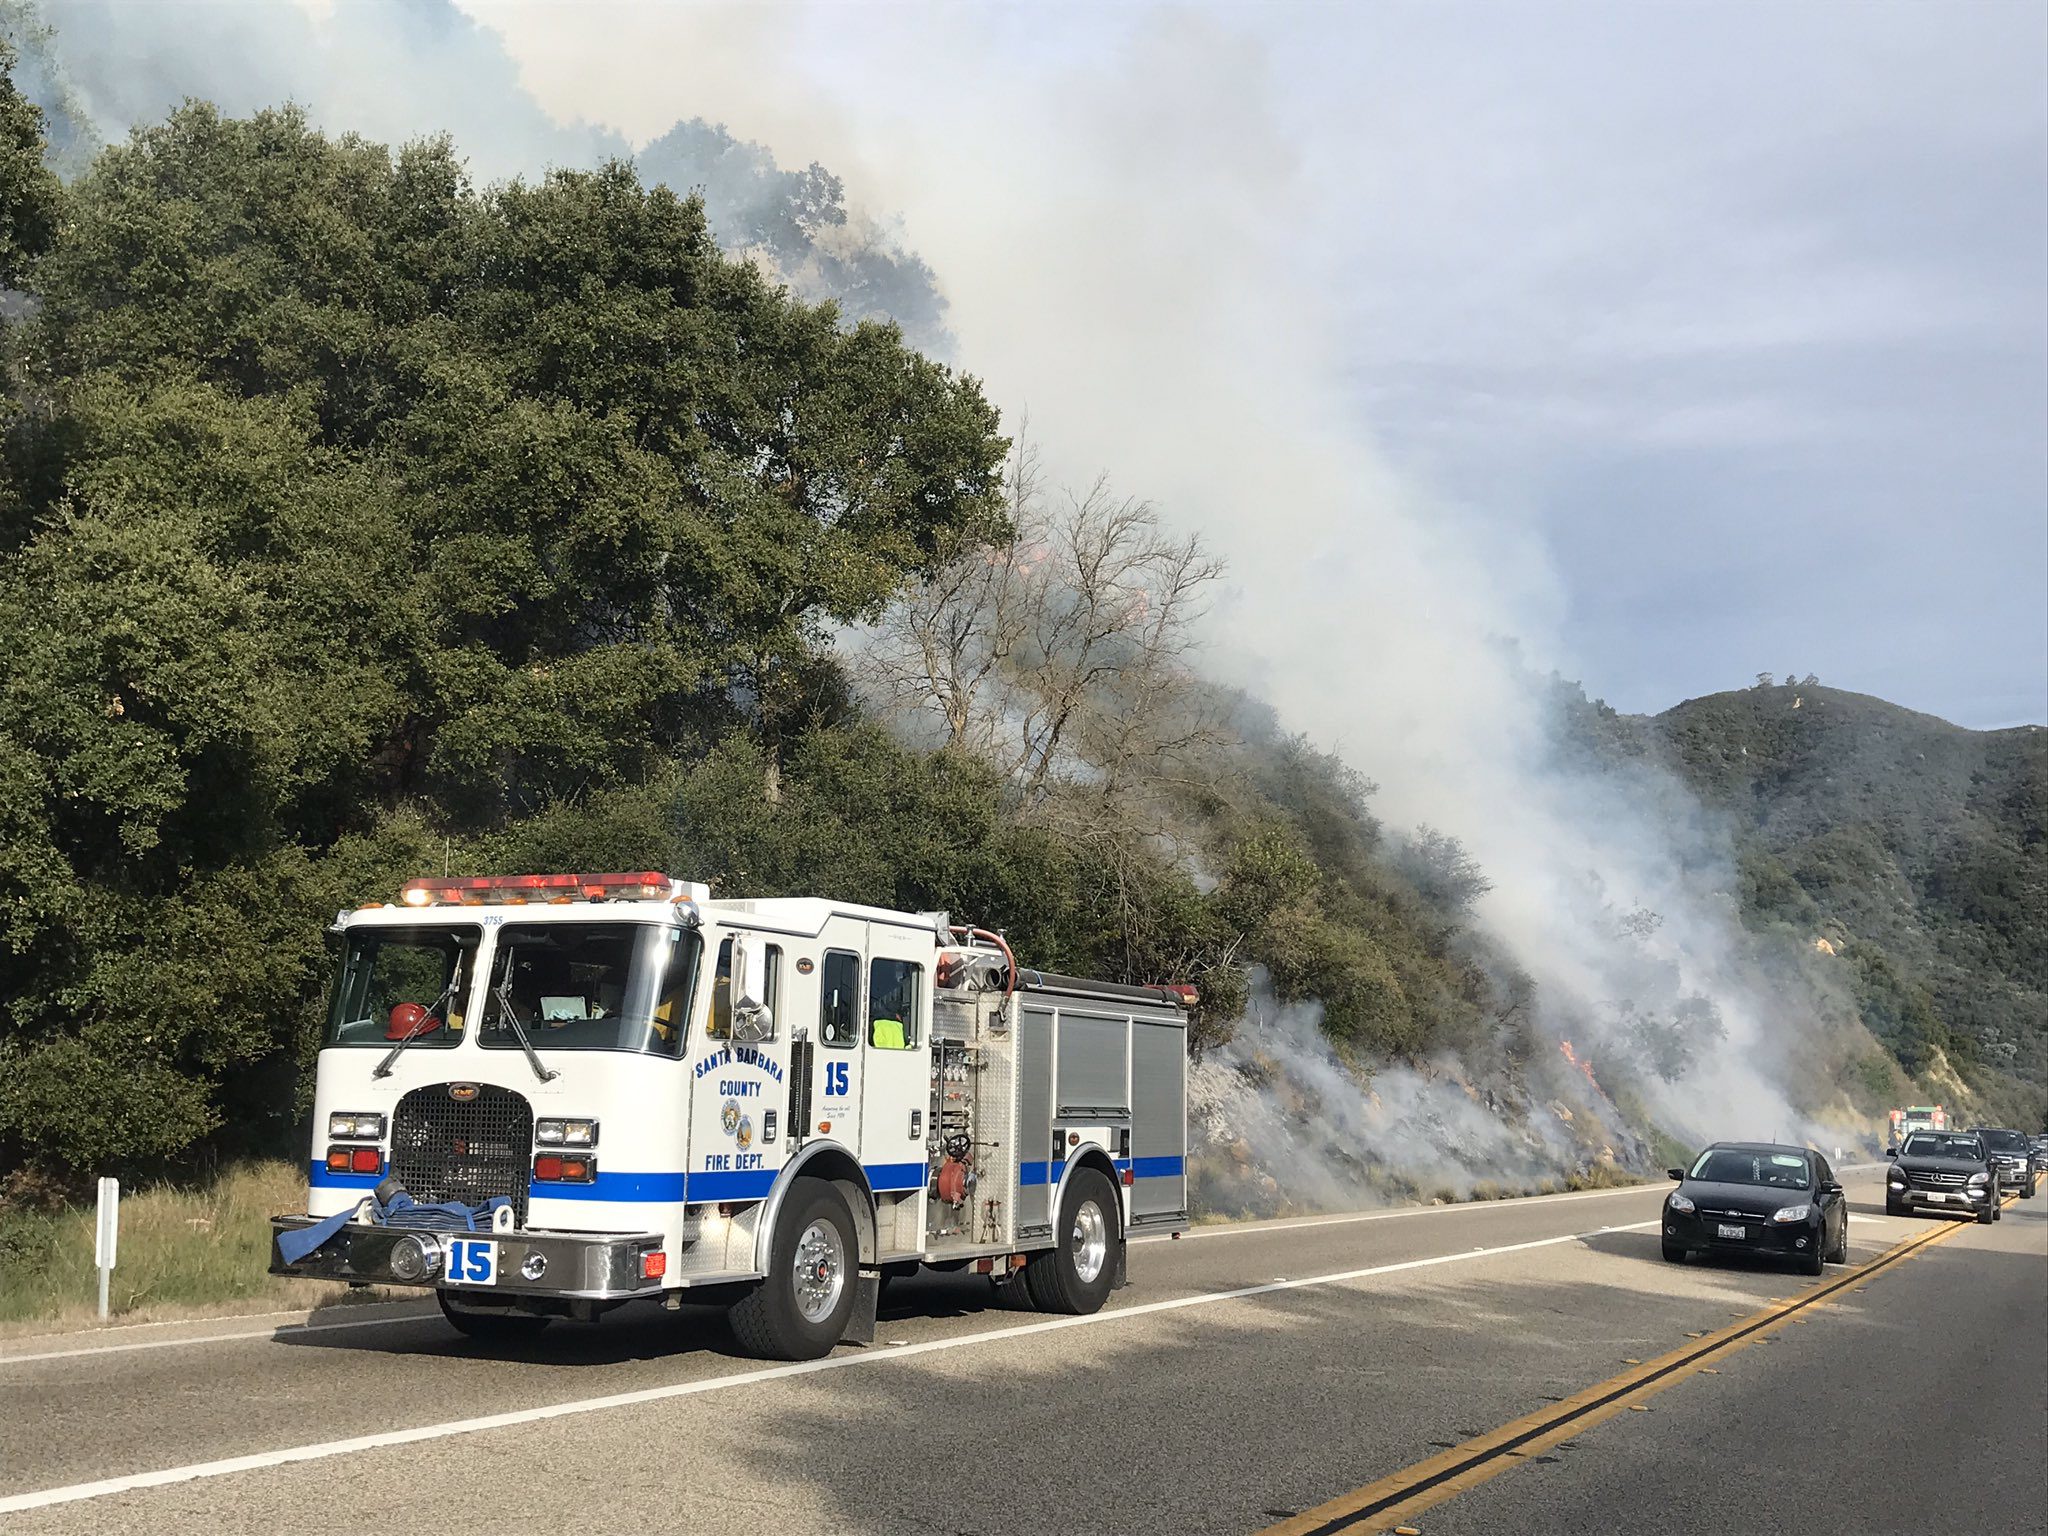 Highway 154 shut down for 15-acre vegetation fire near West Camino Cielo